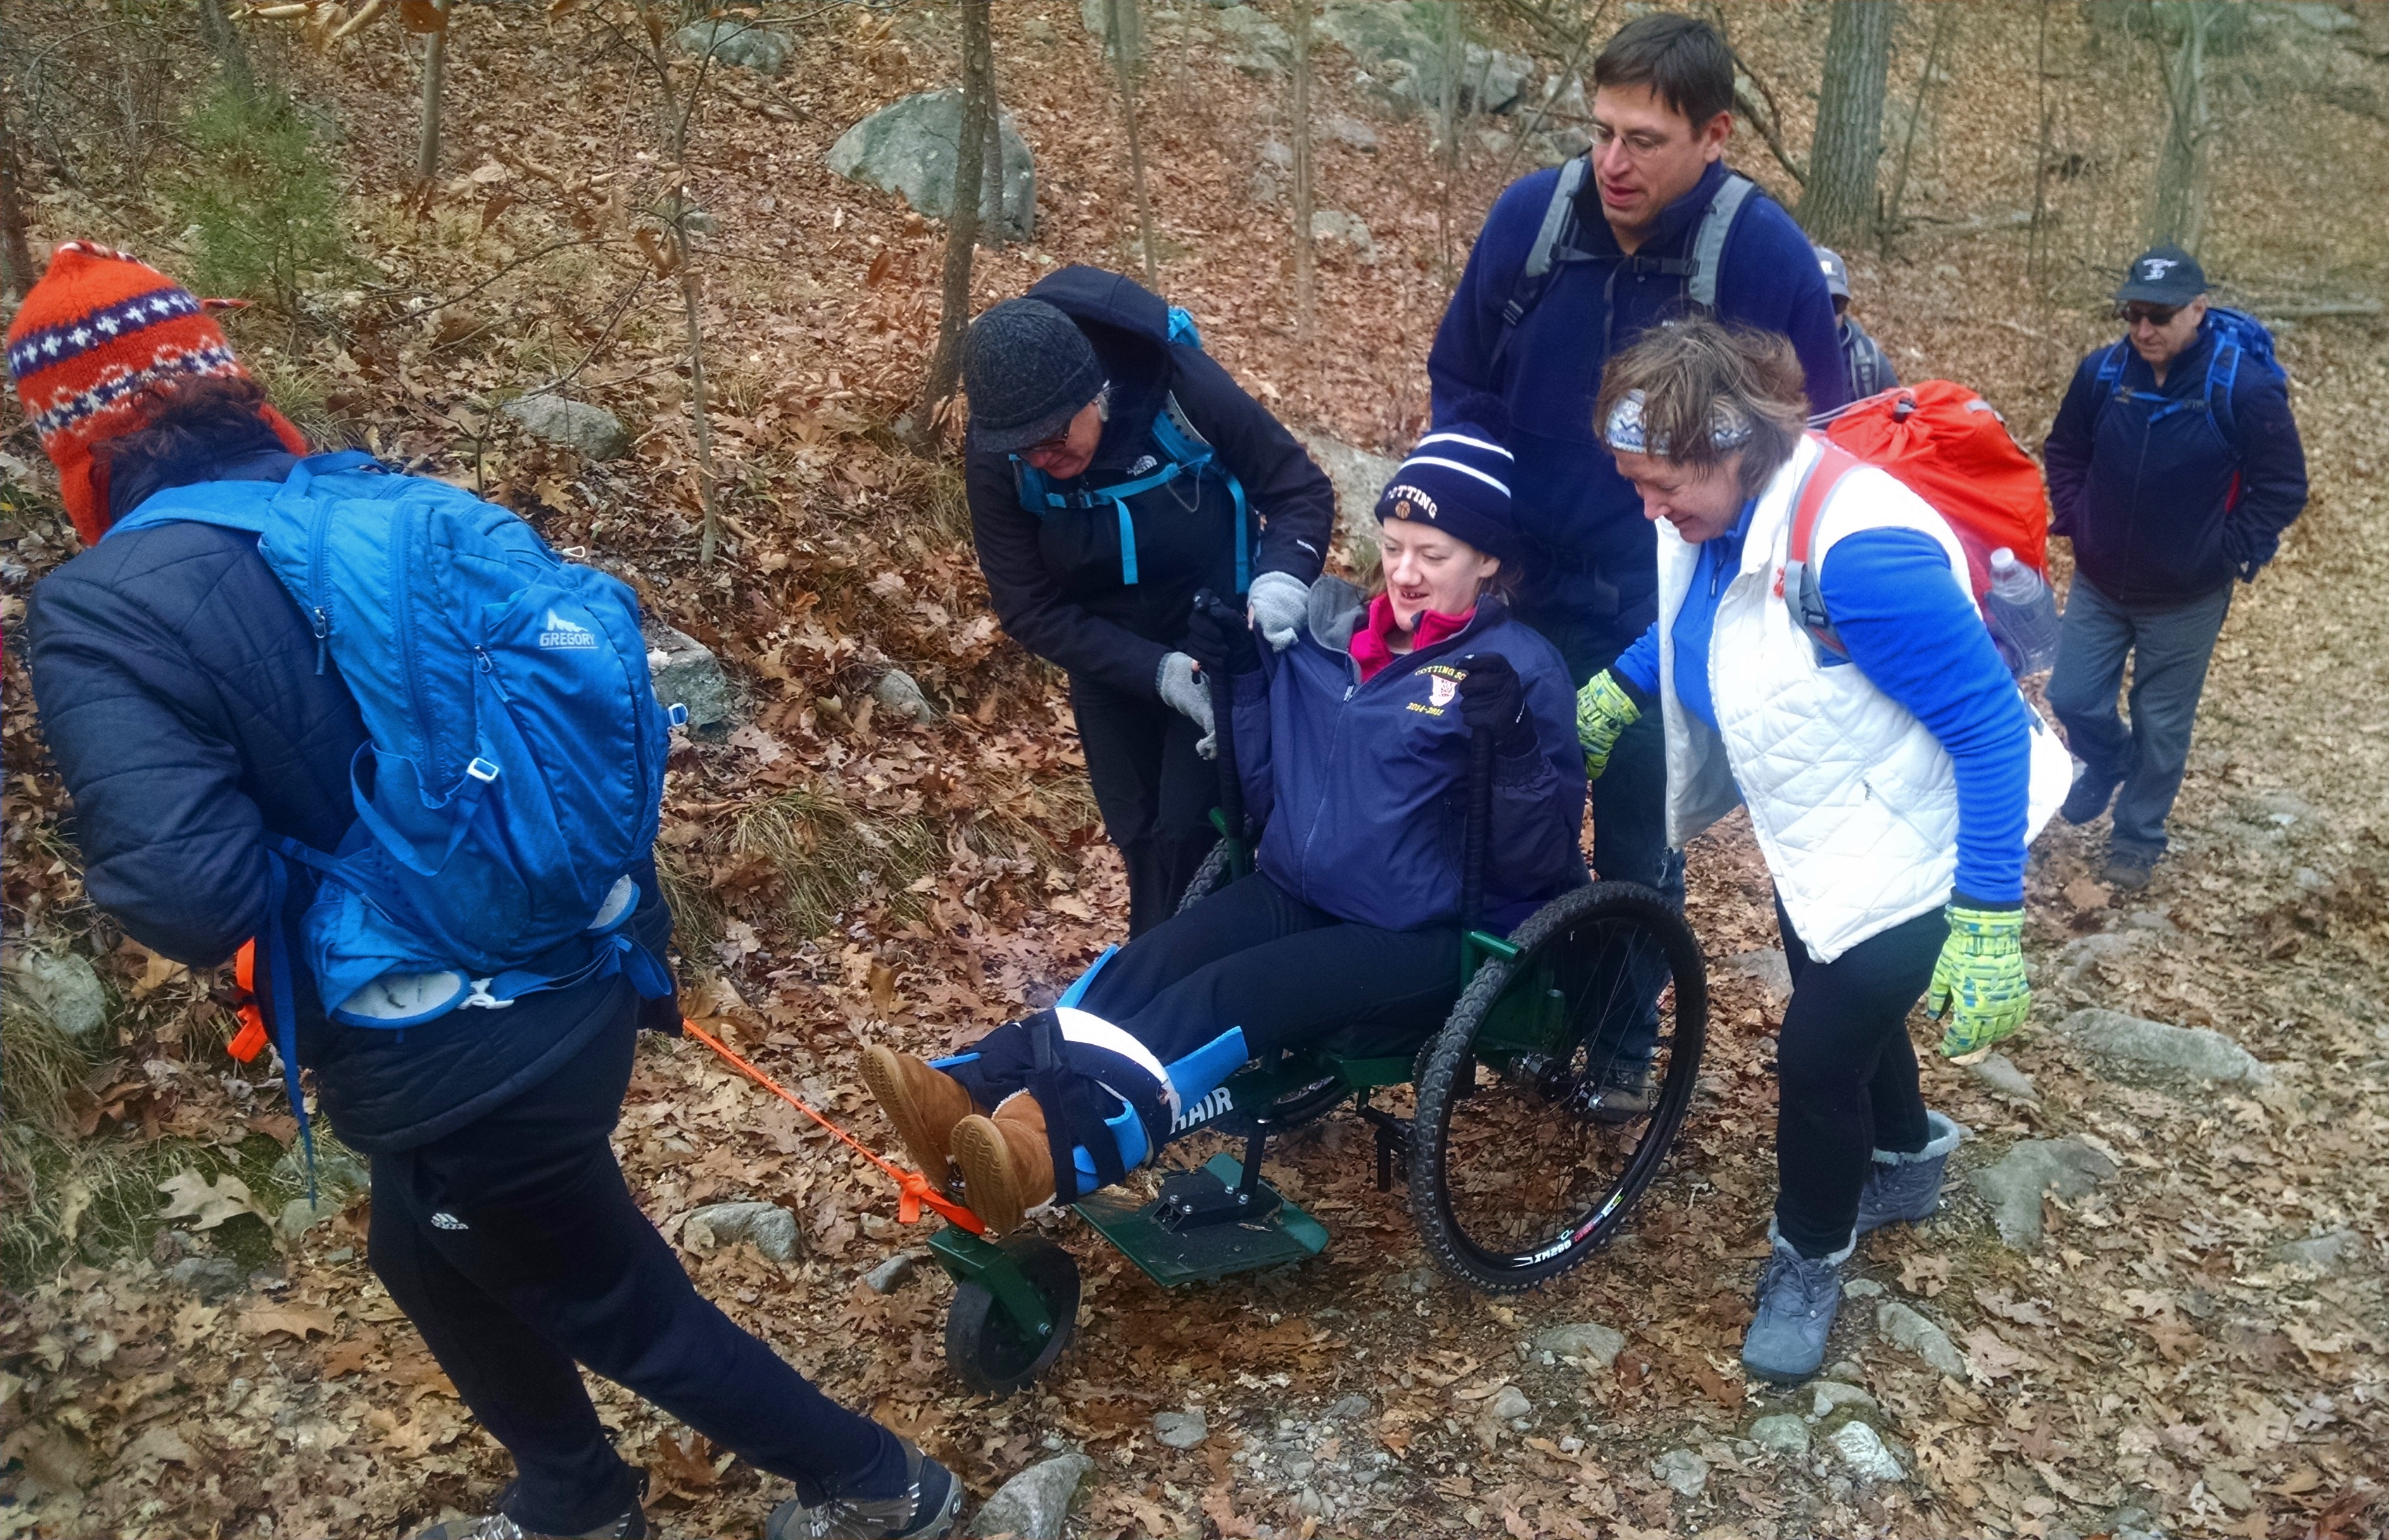 A hiker in a GRIT Freedom Chair is being pushed up a hilly trail by several hikers behind the chair. A strap on the front of the chair is being used to pull it as well.